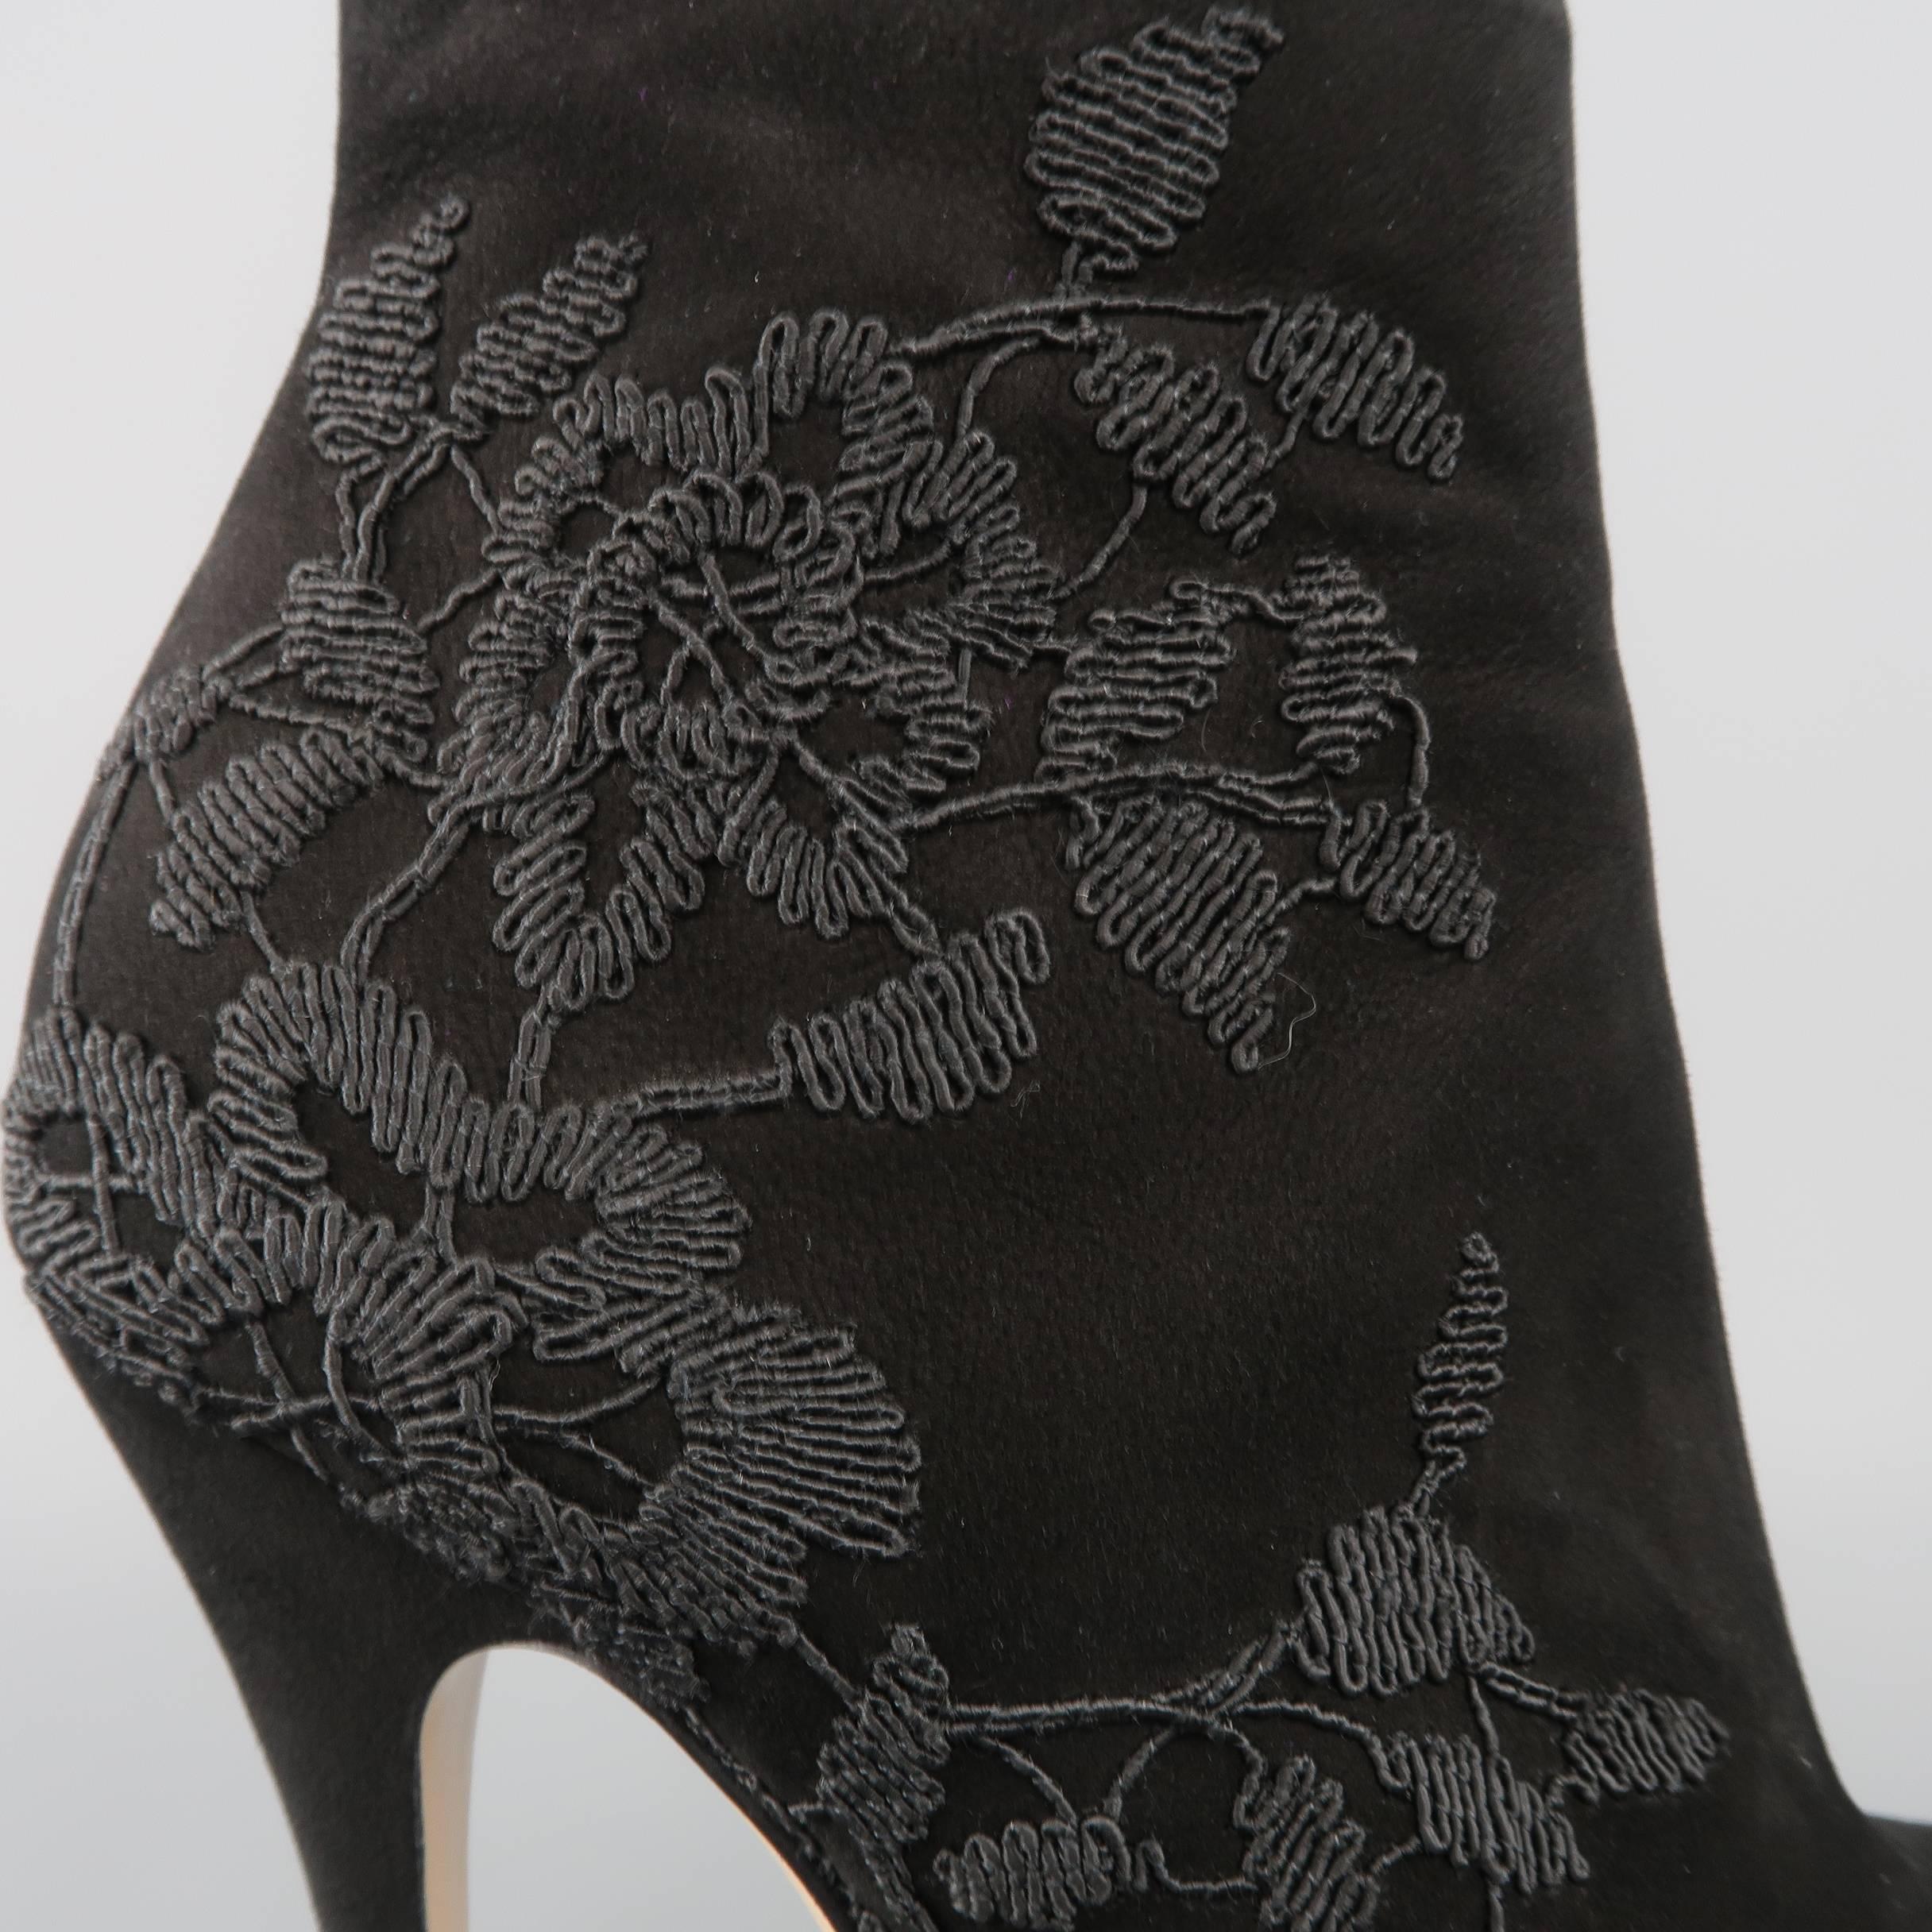 VALENTINO ankle booties come in black suede and feature a rounded point toe, concealed platform, covered stiletto heel, and lace appliques. Made in Italy.
 
Good Pre-Owned Condition.
Marked: IT 38.5
 
Measurements:
 
Heel: 4.75 in.
Platform: 1